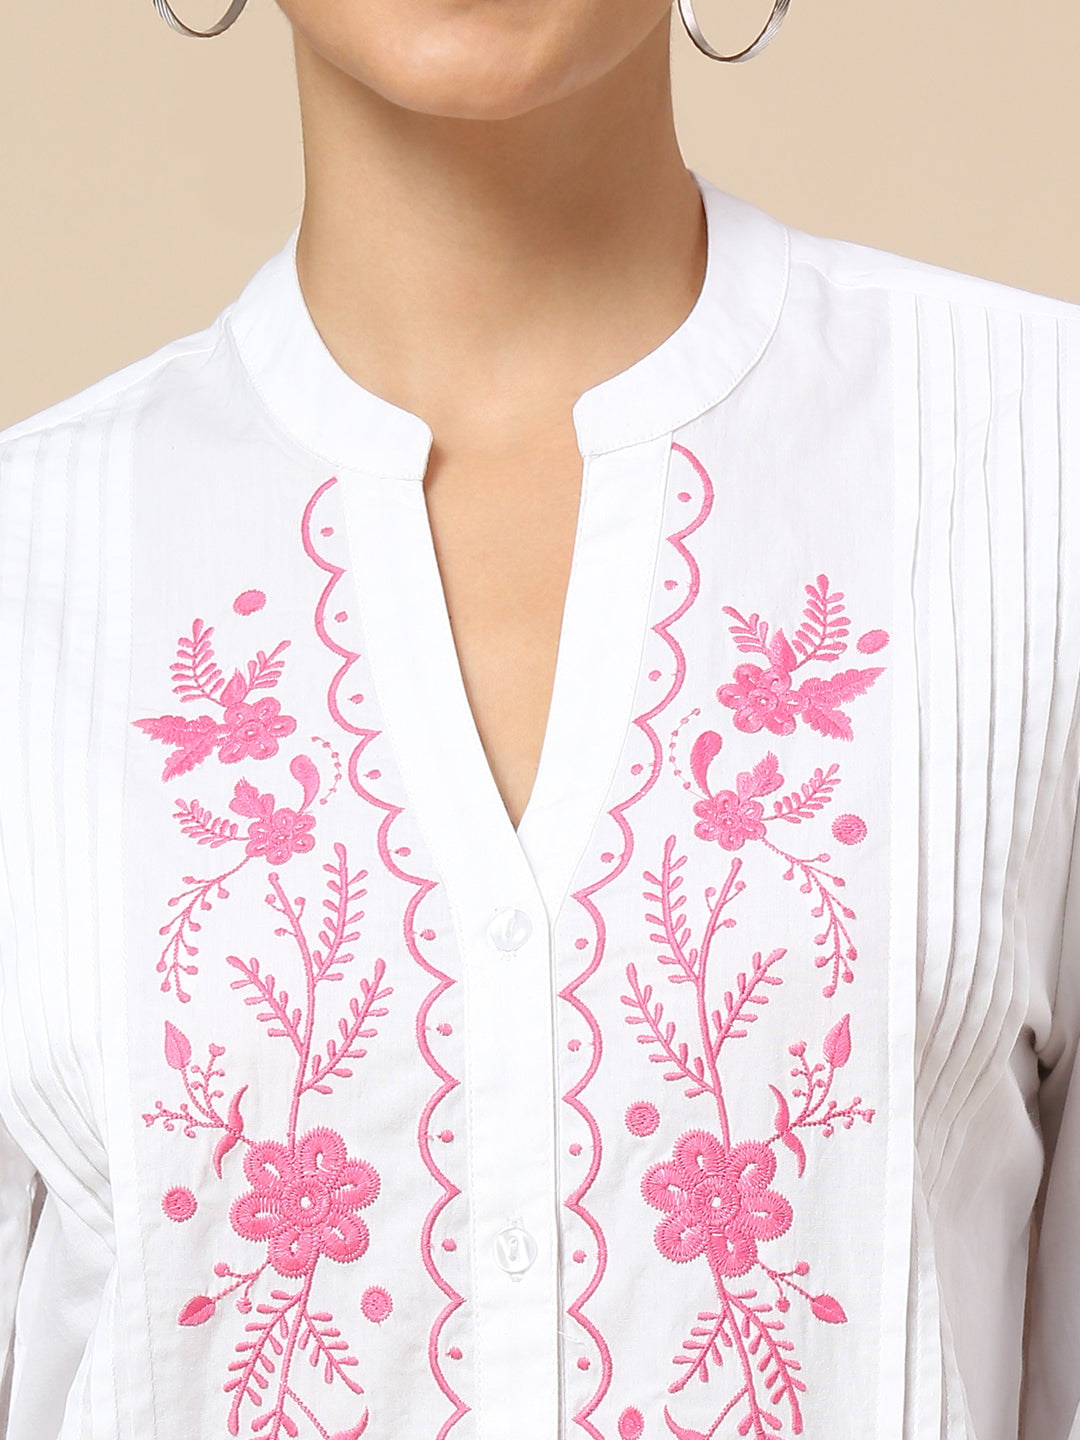 POPLIN BUTTON DOWN EMBROIDERED TUNIC TOP W/ PLEAT DETAILING